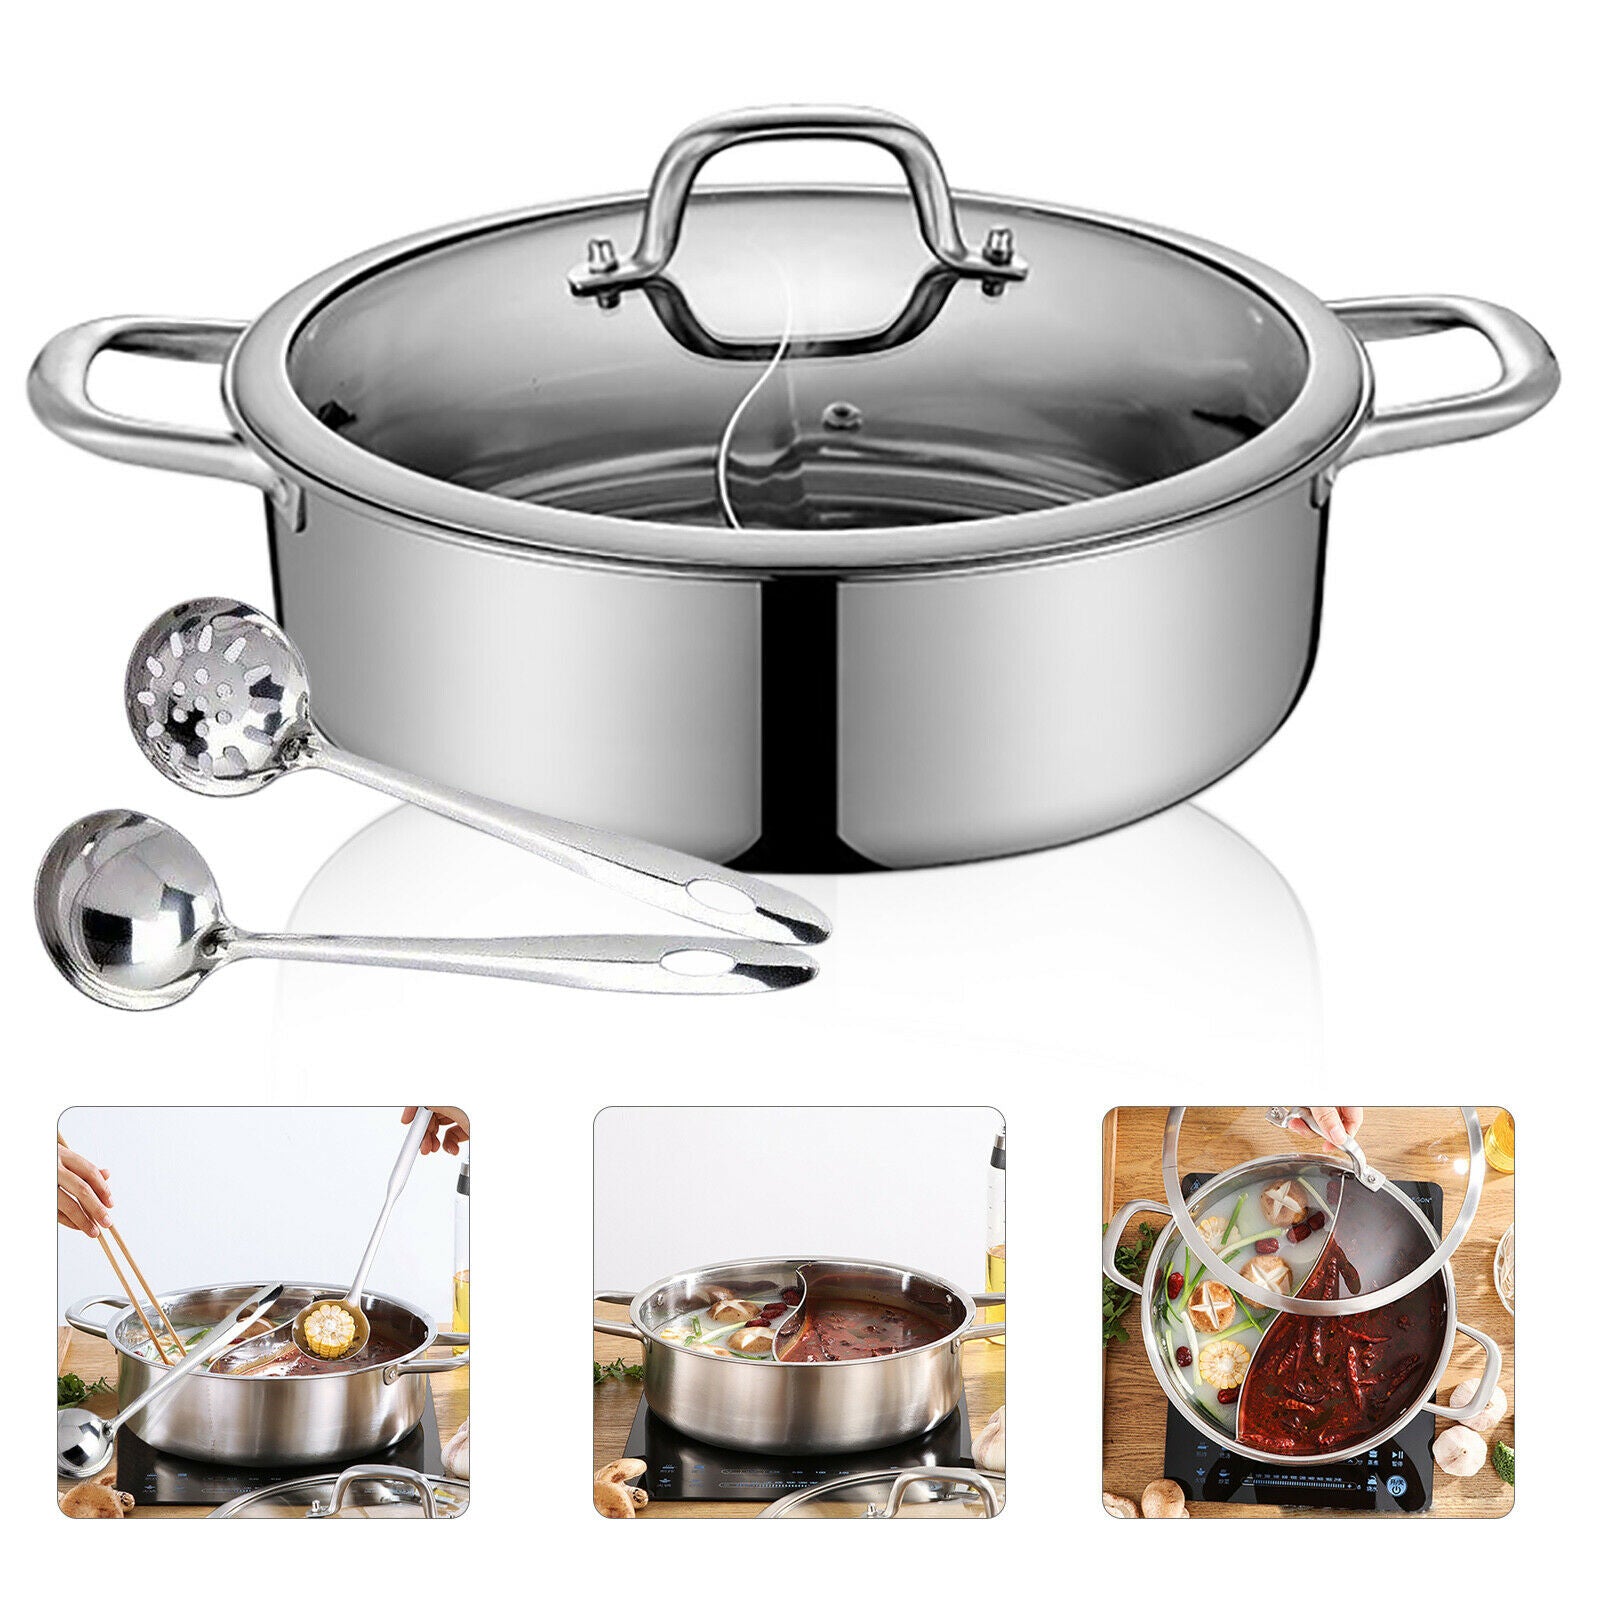 12 Inch Hot Pot, 5l Stainless Steel Two Grid Hot Pot, Chinese Type Dual  Sided Soup Cookware With Comfortable Grip Handle And Clear Lids For  Gathering